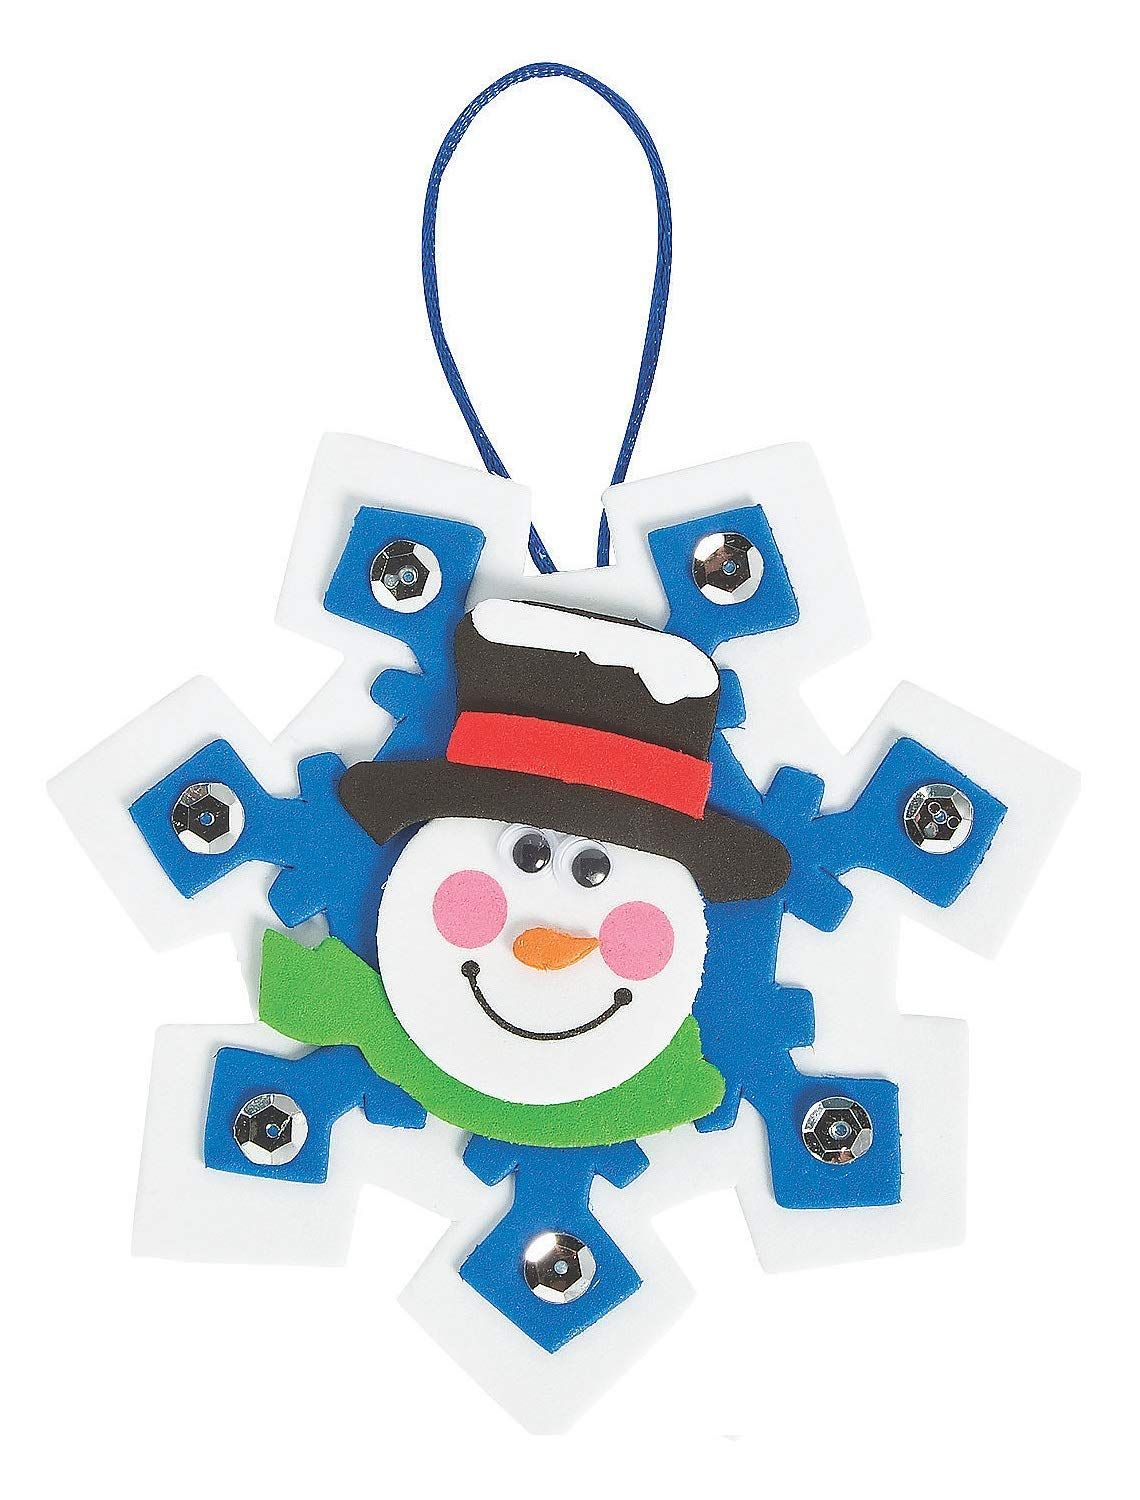 Snowflake shaped with a hanging string and a smiling snowman face in front of it